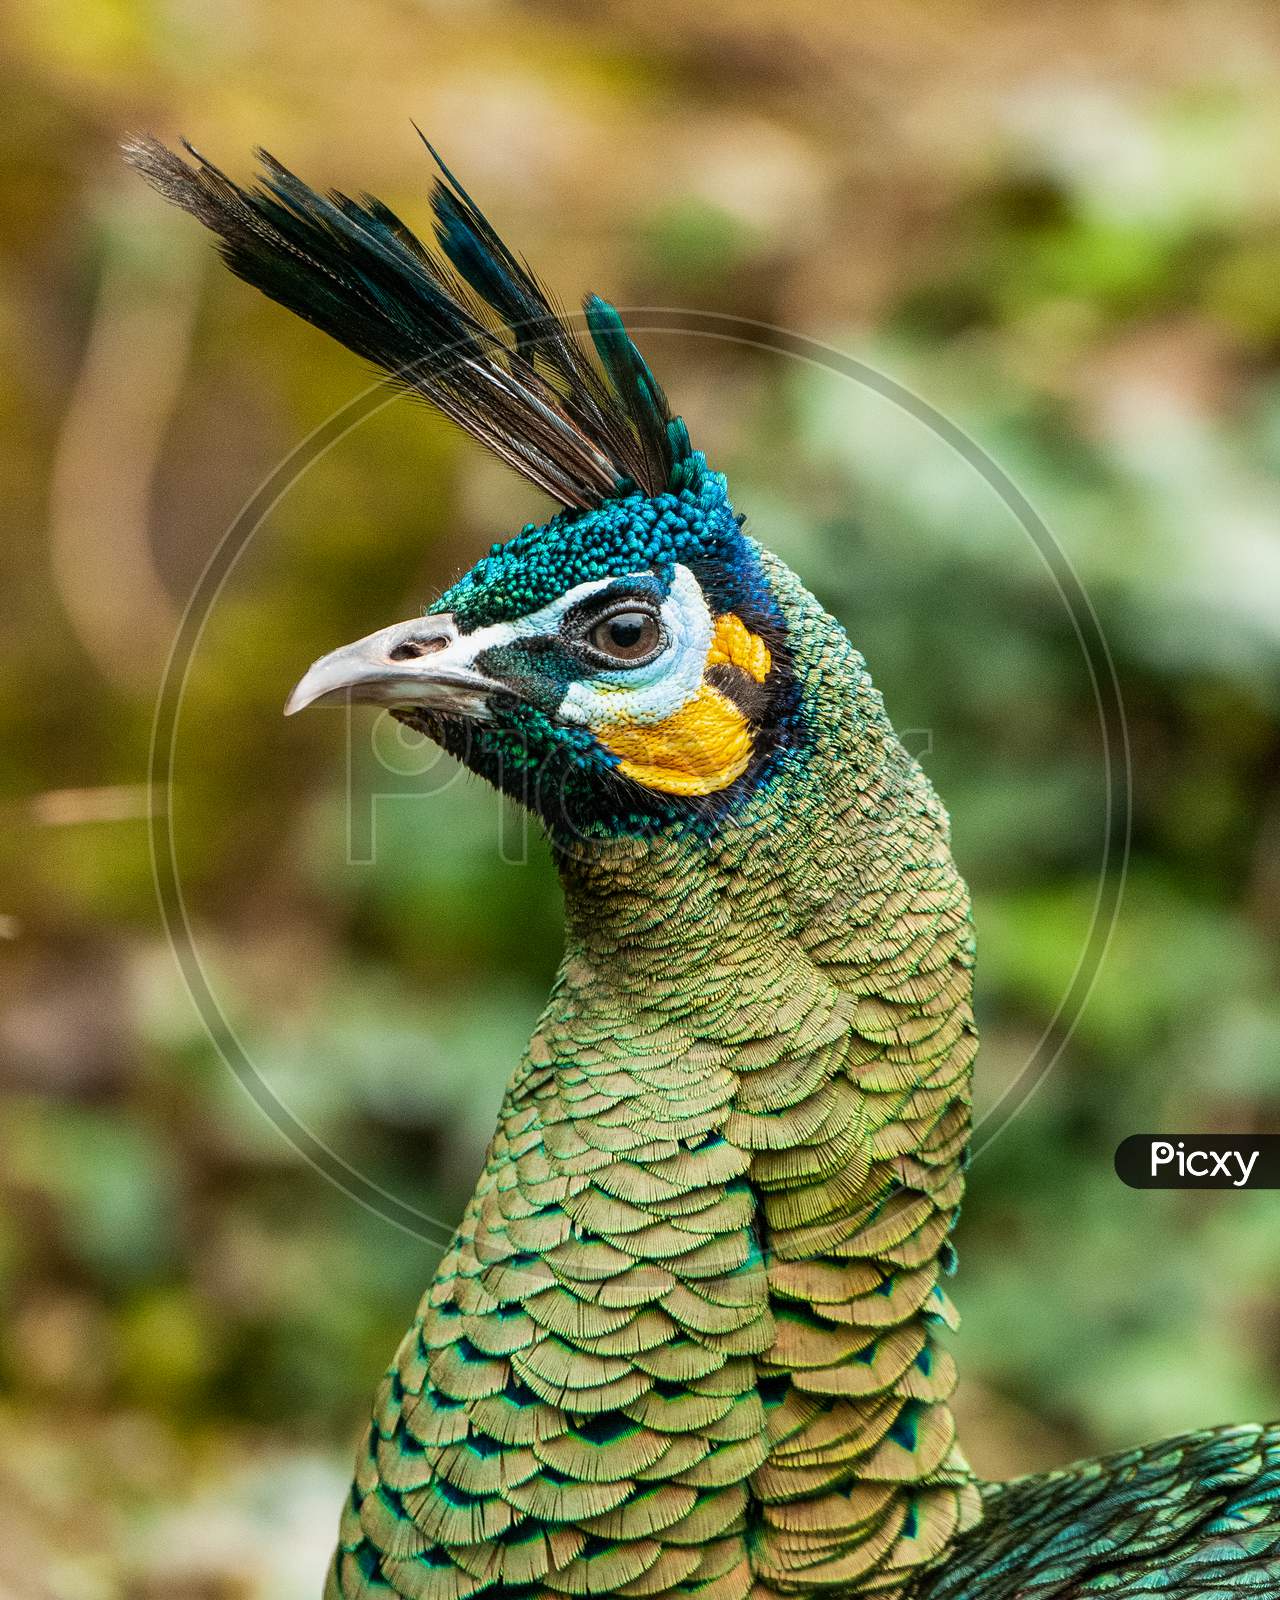 Indian Green Peacock portrait against blurred background